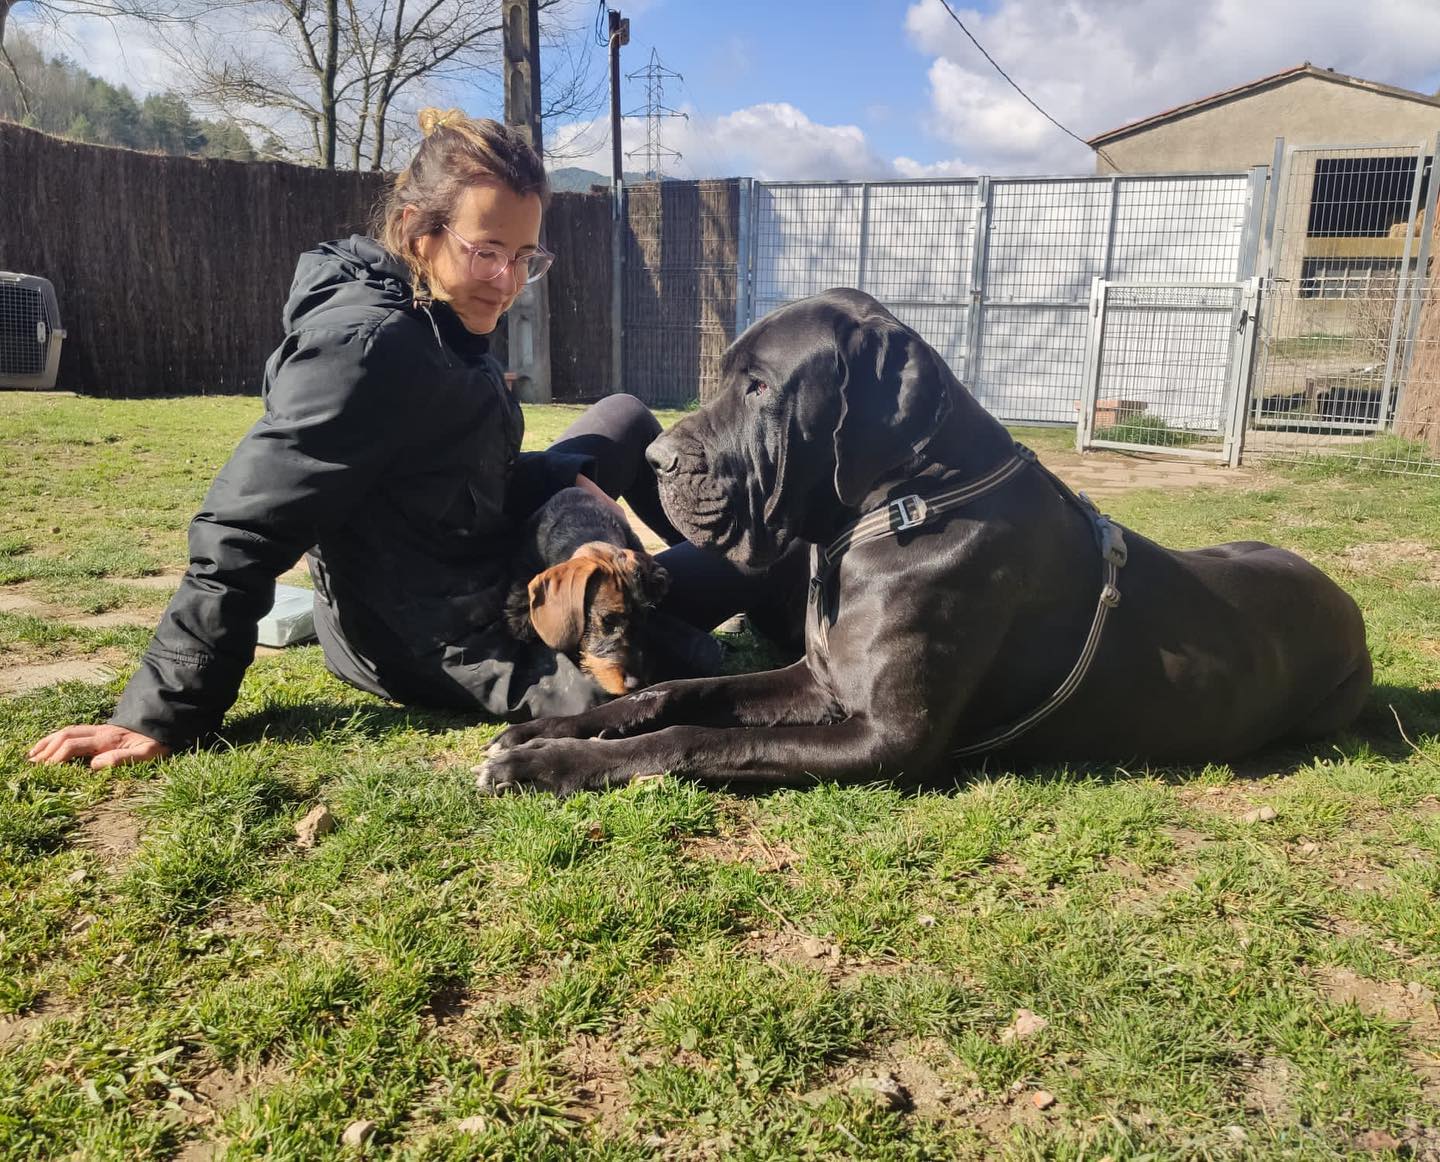 Meritxell Professional Canine Educator Together with Cane Corso